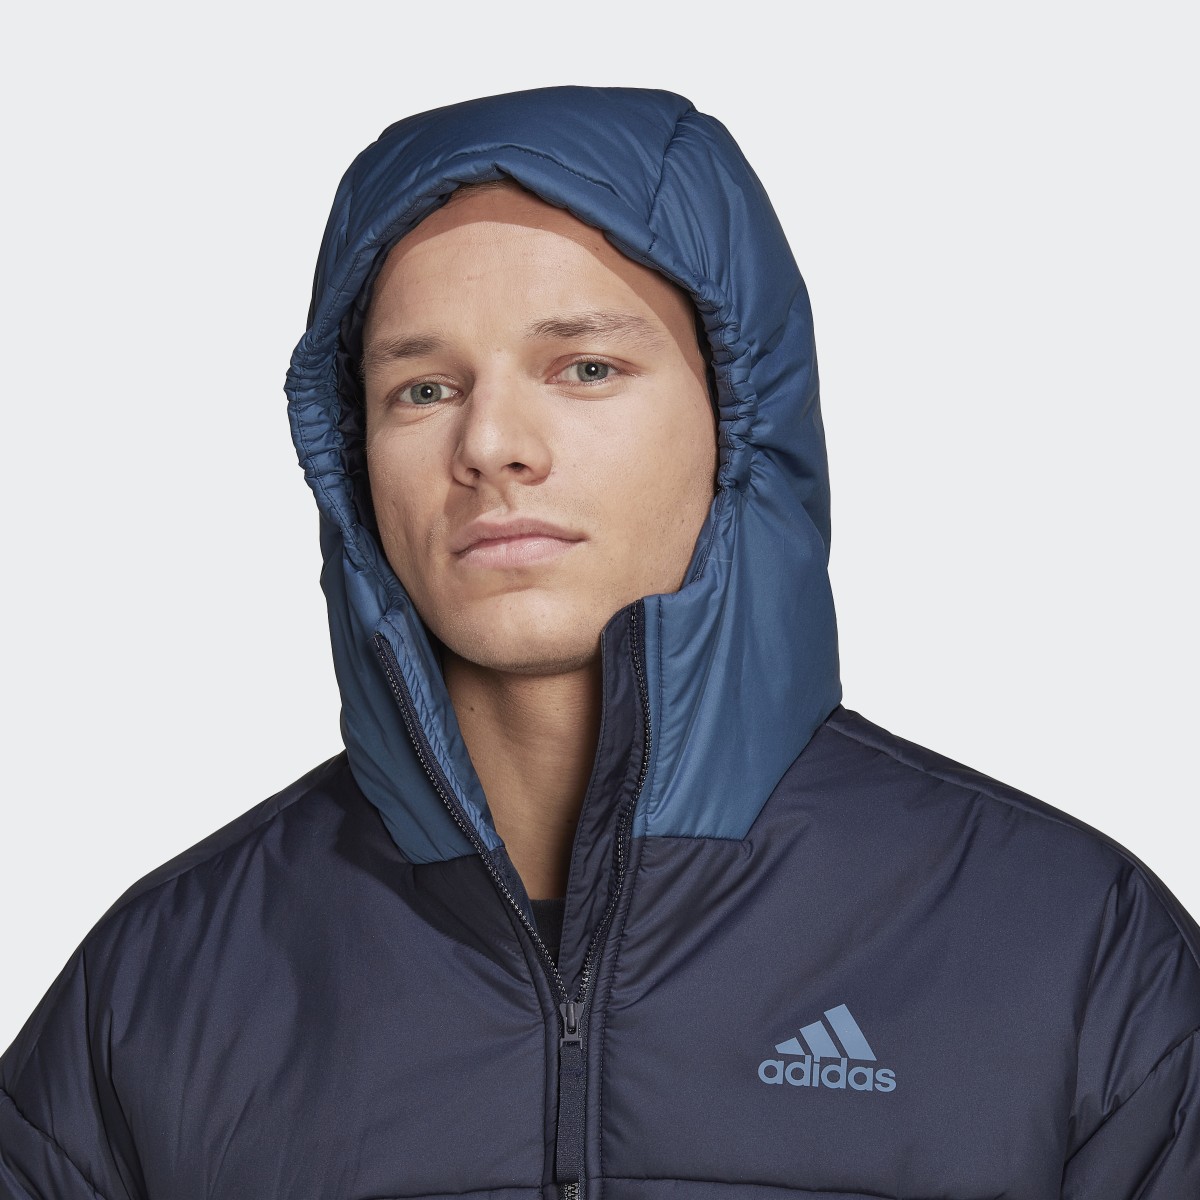 Adidas BSC 3-Stripes Puffy Hooded Jacket. 8